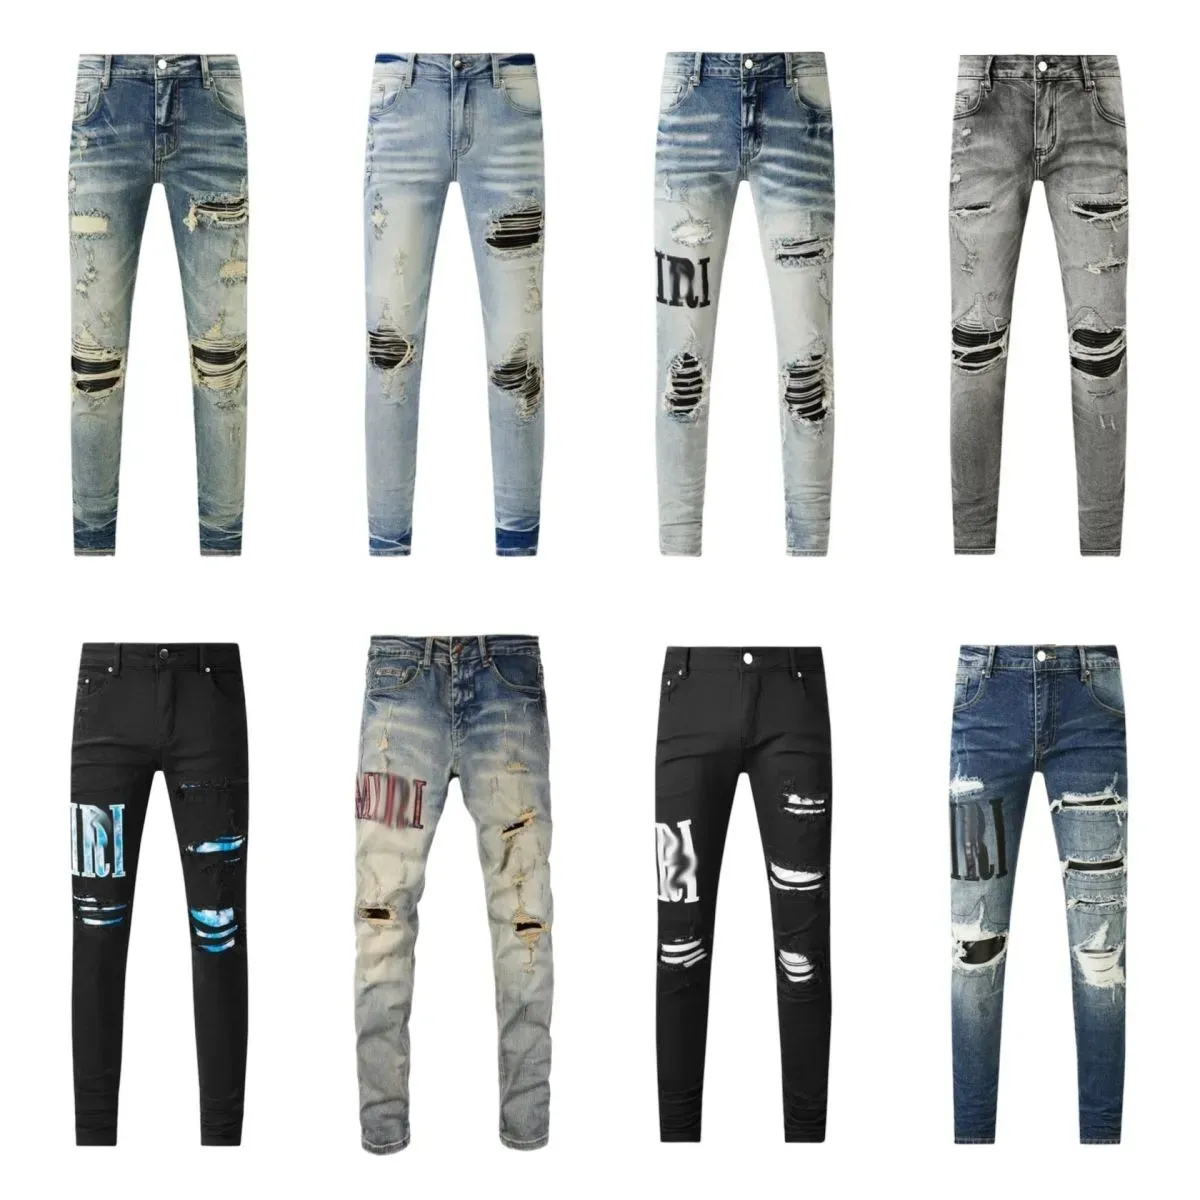 Jeans Fashion for Mens Brand Designer Black Ripped Self Cultivation Breathable Popular Stacked Jeans Men Pants L6